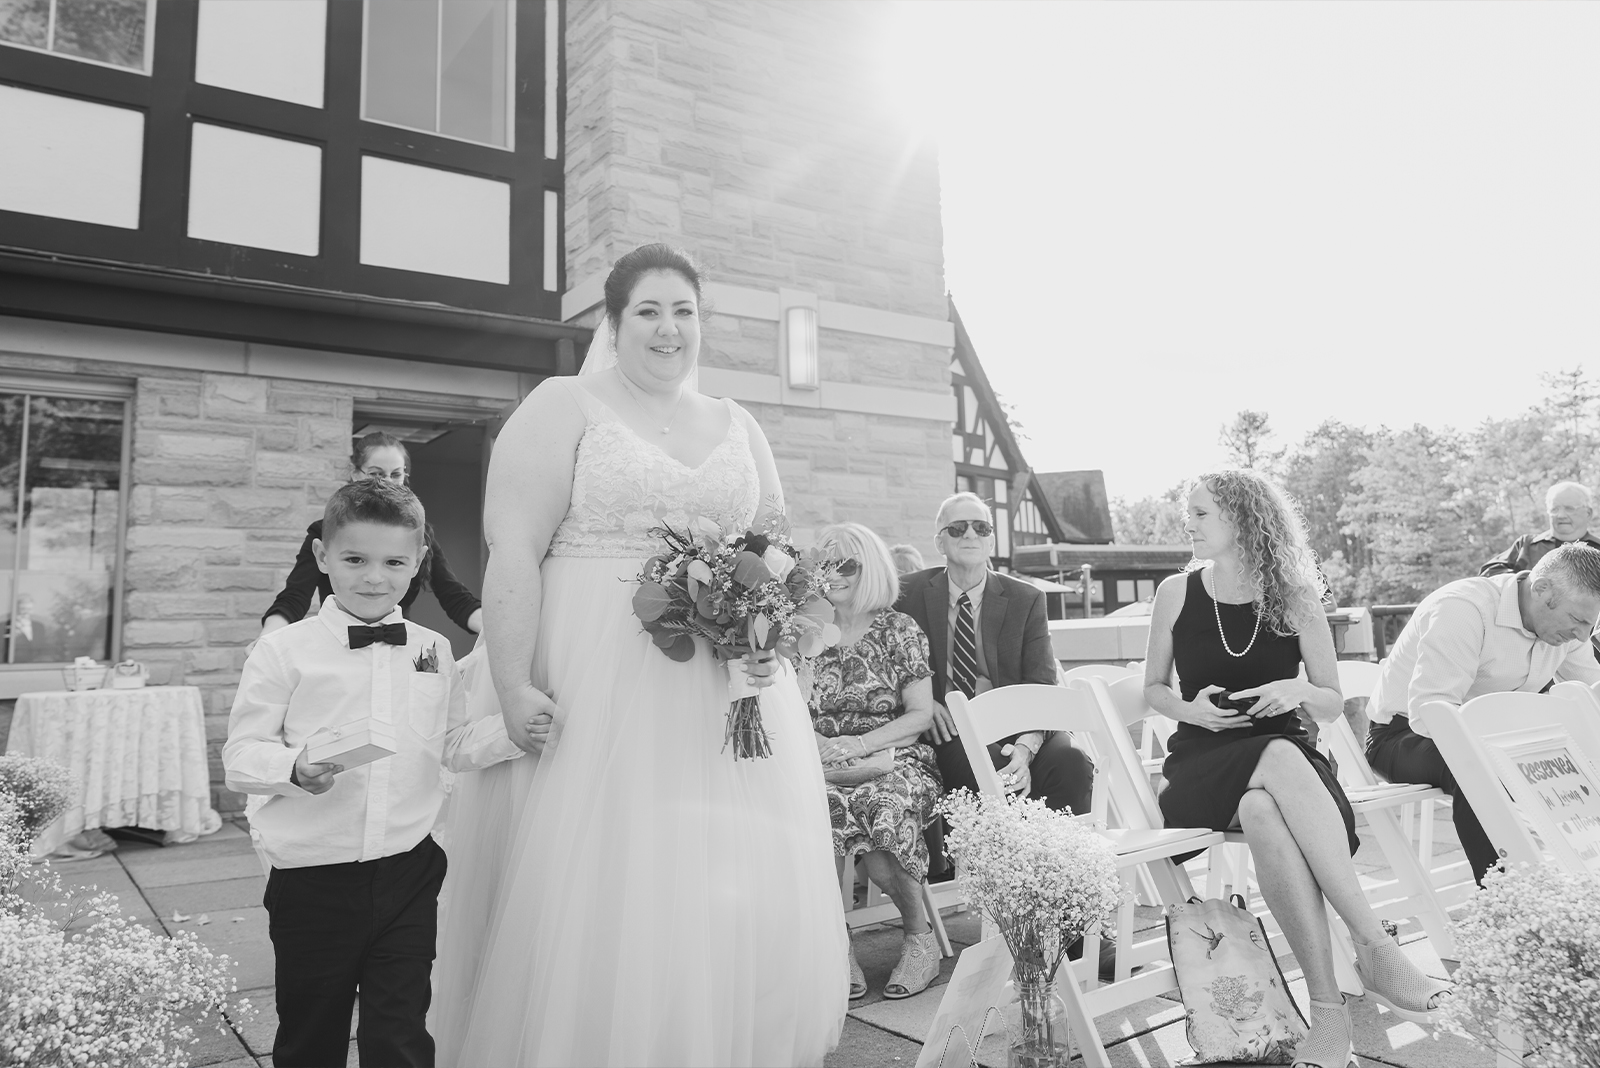 Bride with son, ring bearer, bridal march, bridal processional, cute, smile, black and white, classic wedding photo, outdoor September wedding ceremony at Punderson Manor Lodge & Conference Center, Newbury Township OH